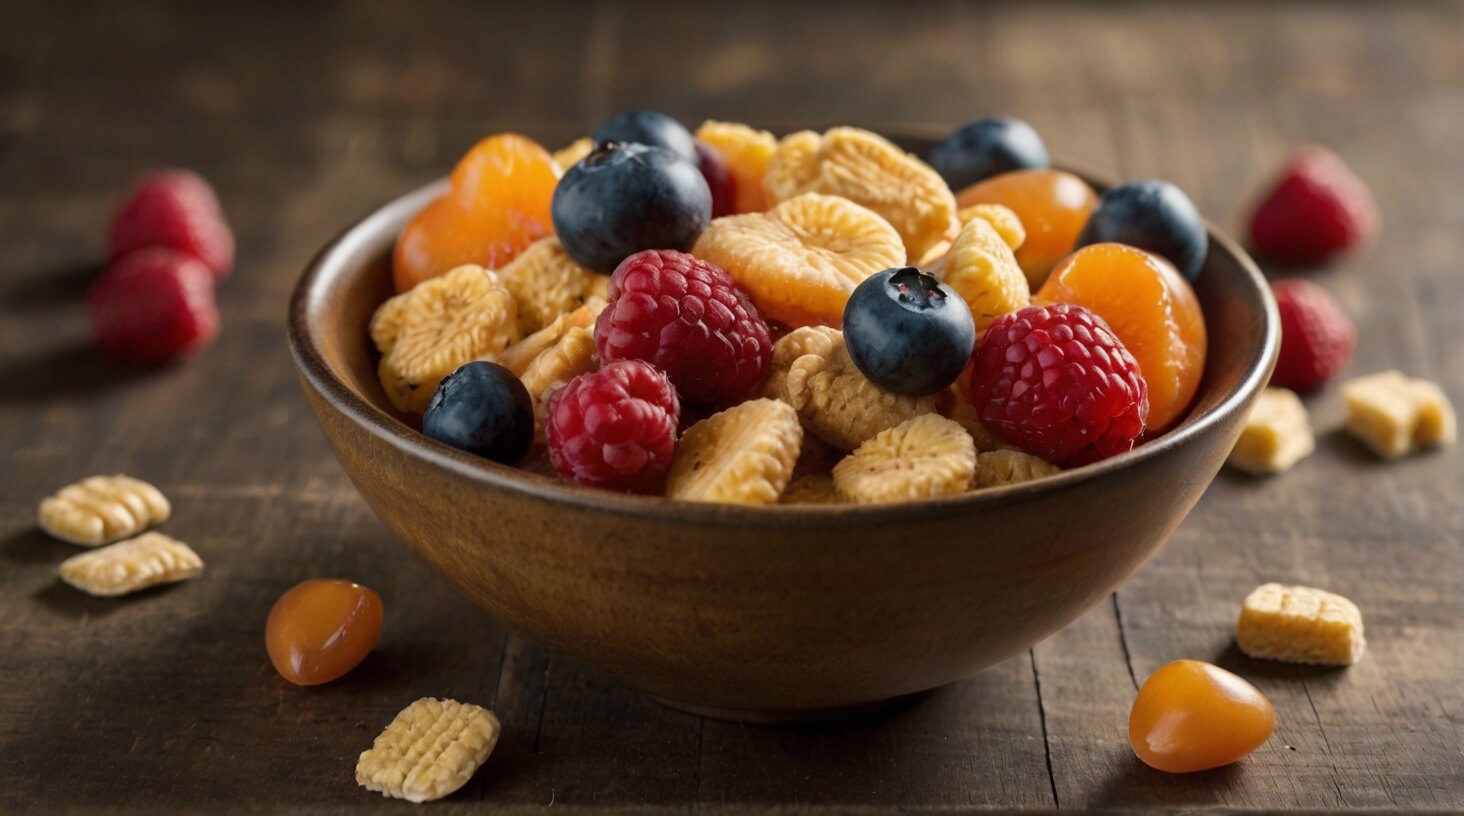 A bowl filled with fresh fruits and nuts, symbolizing the benefits of healthy snacking.